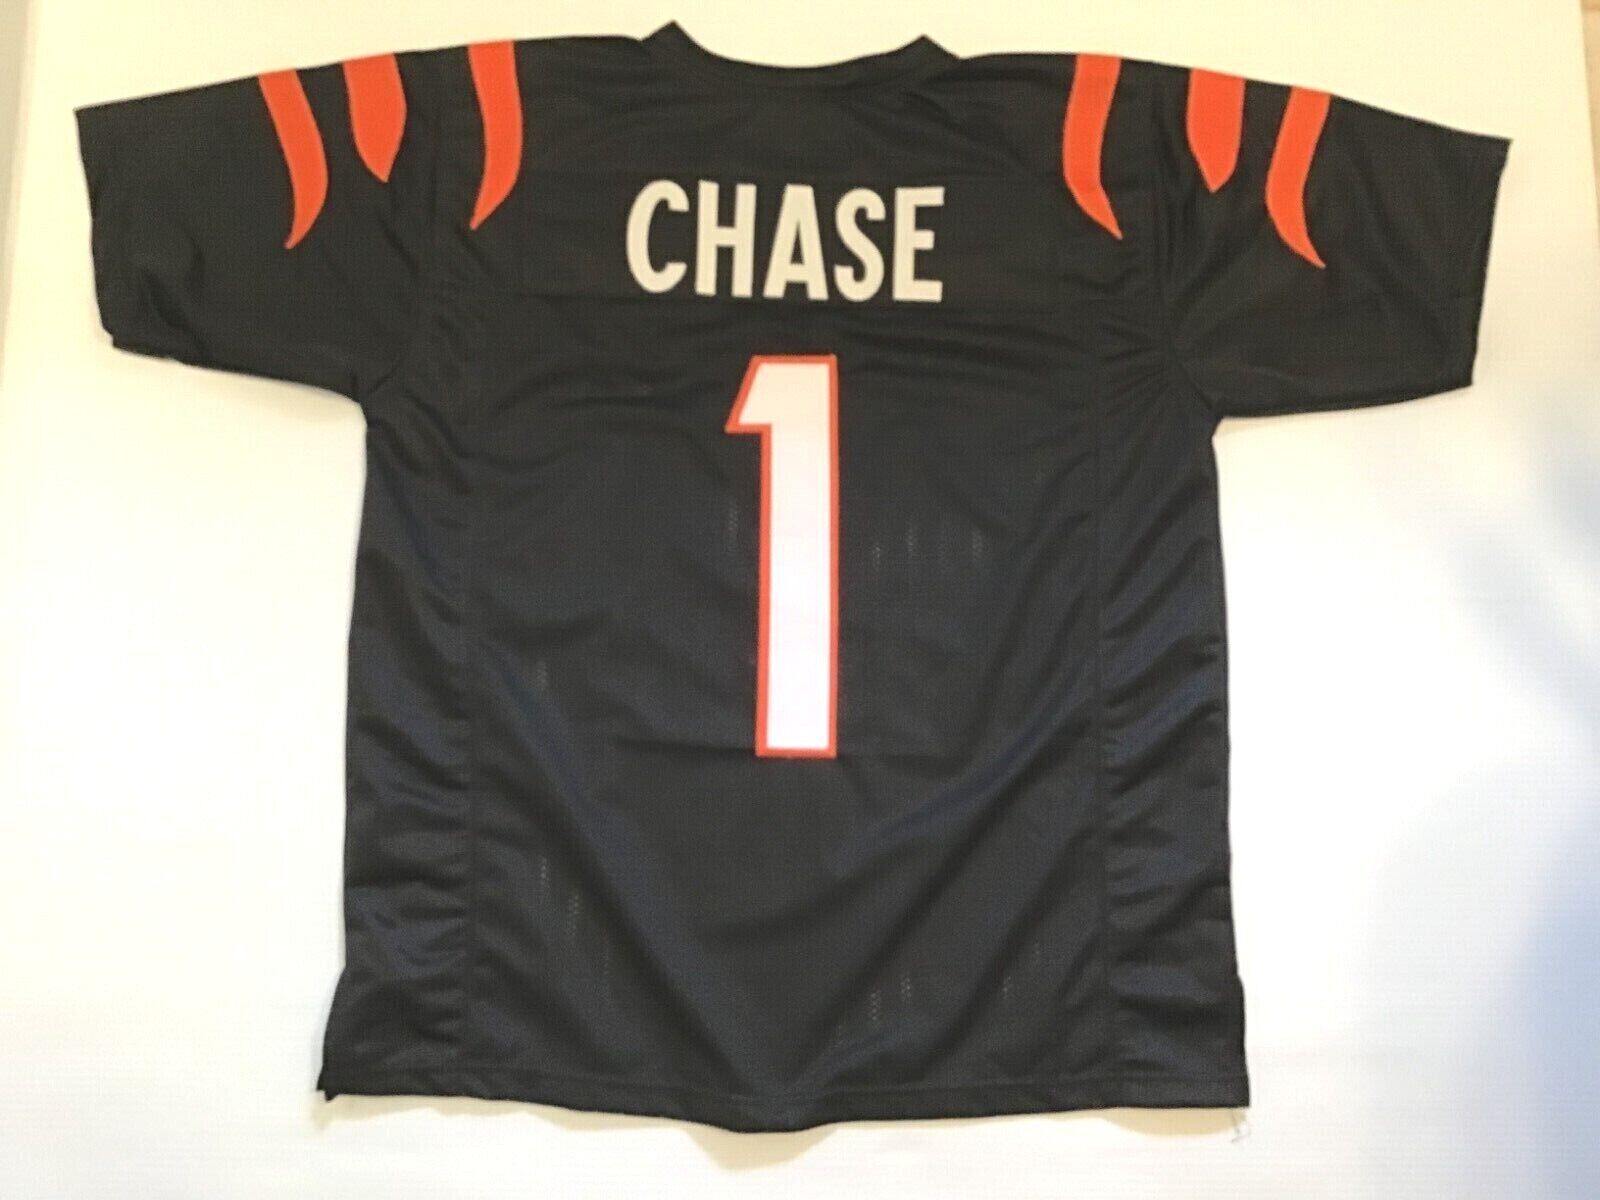 UNSIGNED CUSTOM Sewn Stitched Ja'Marr Chase Orange or Black Jersey M to 2XL